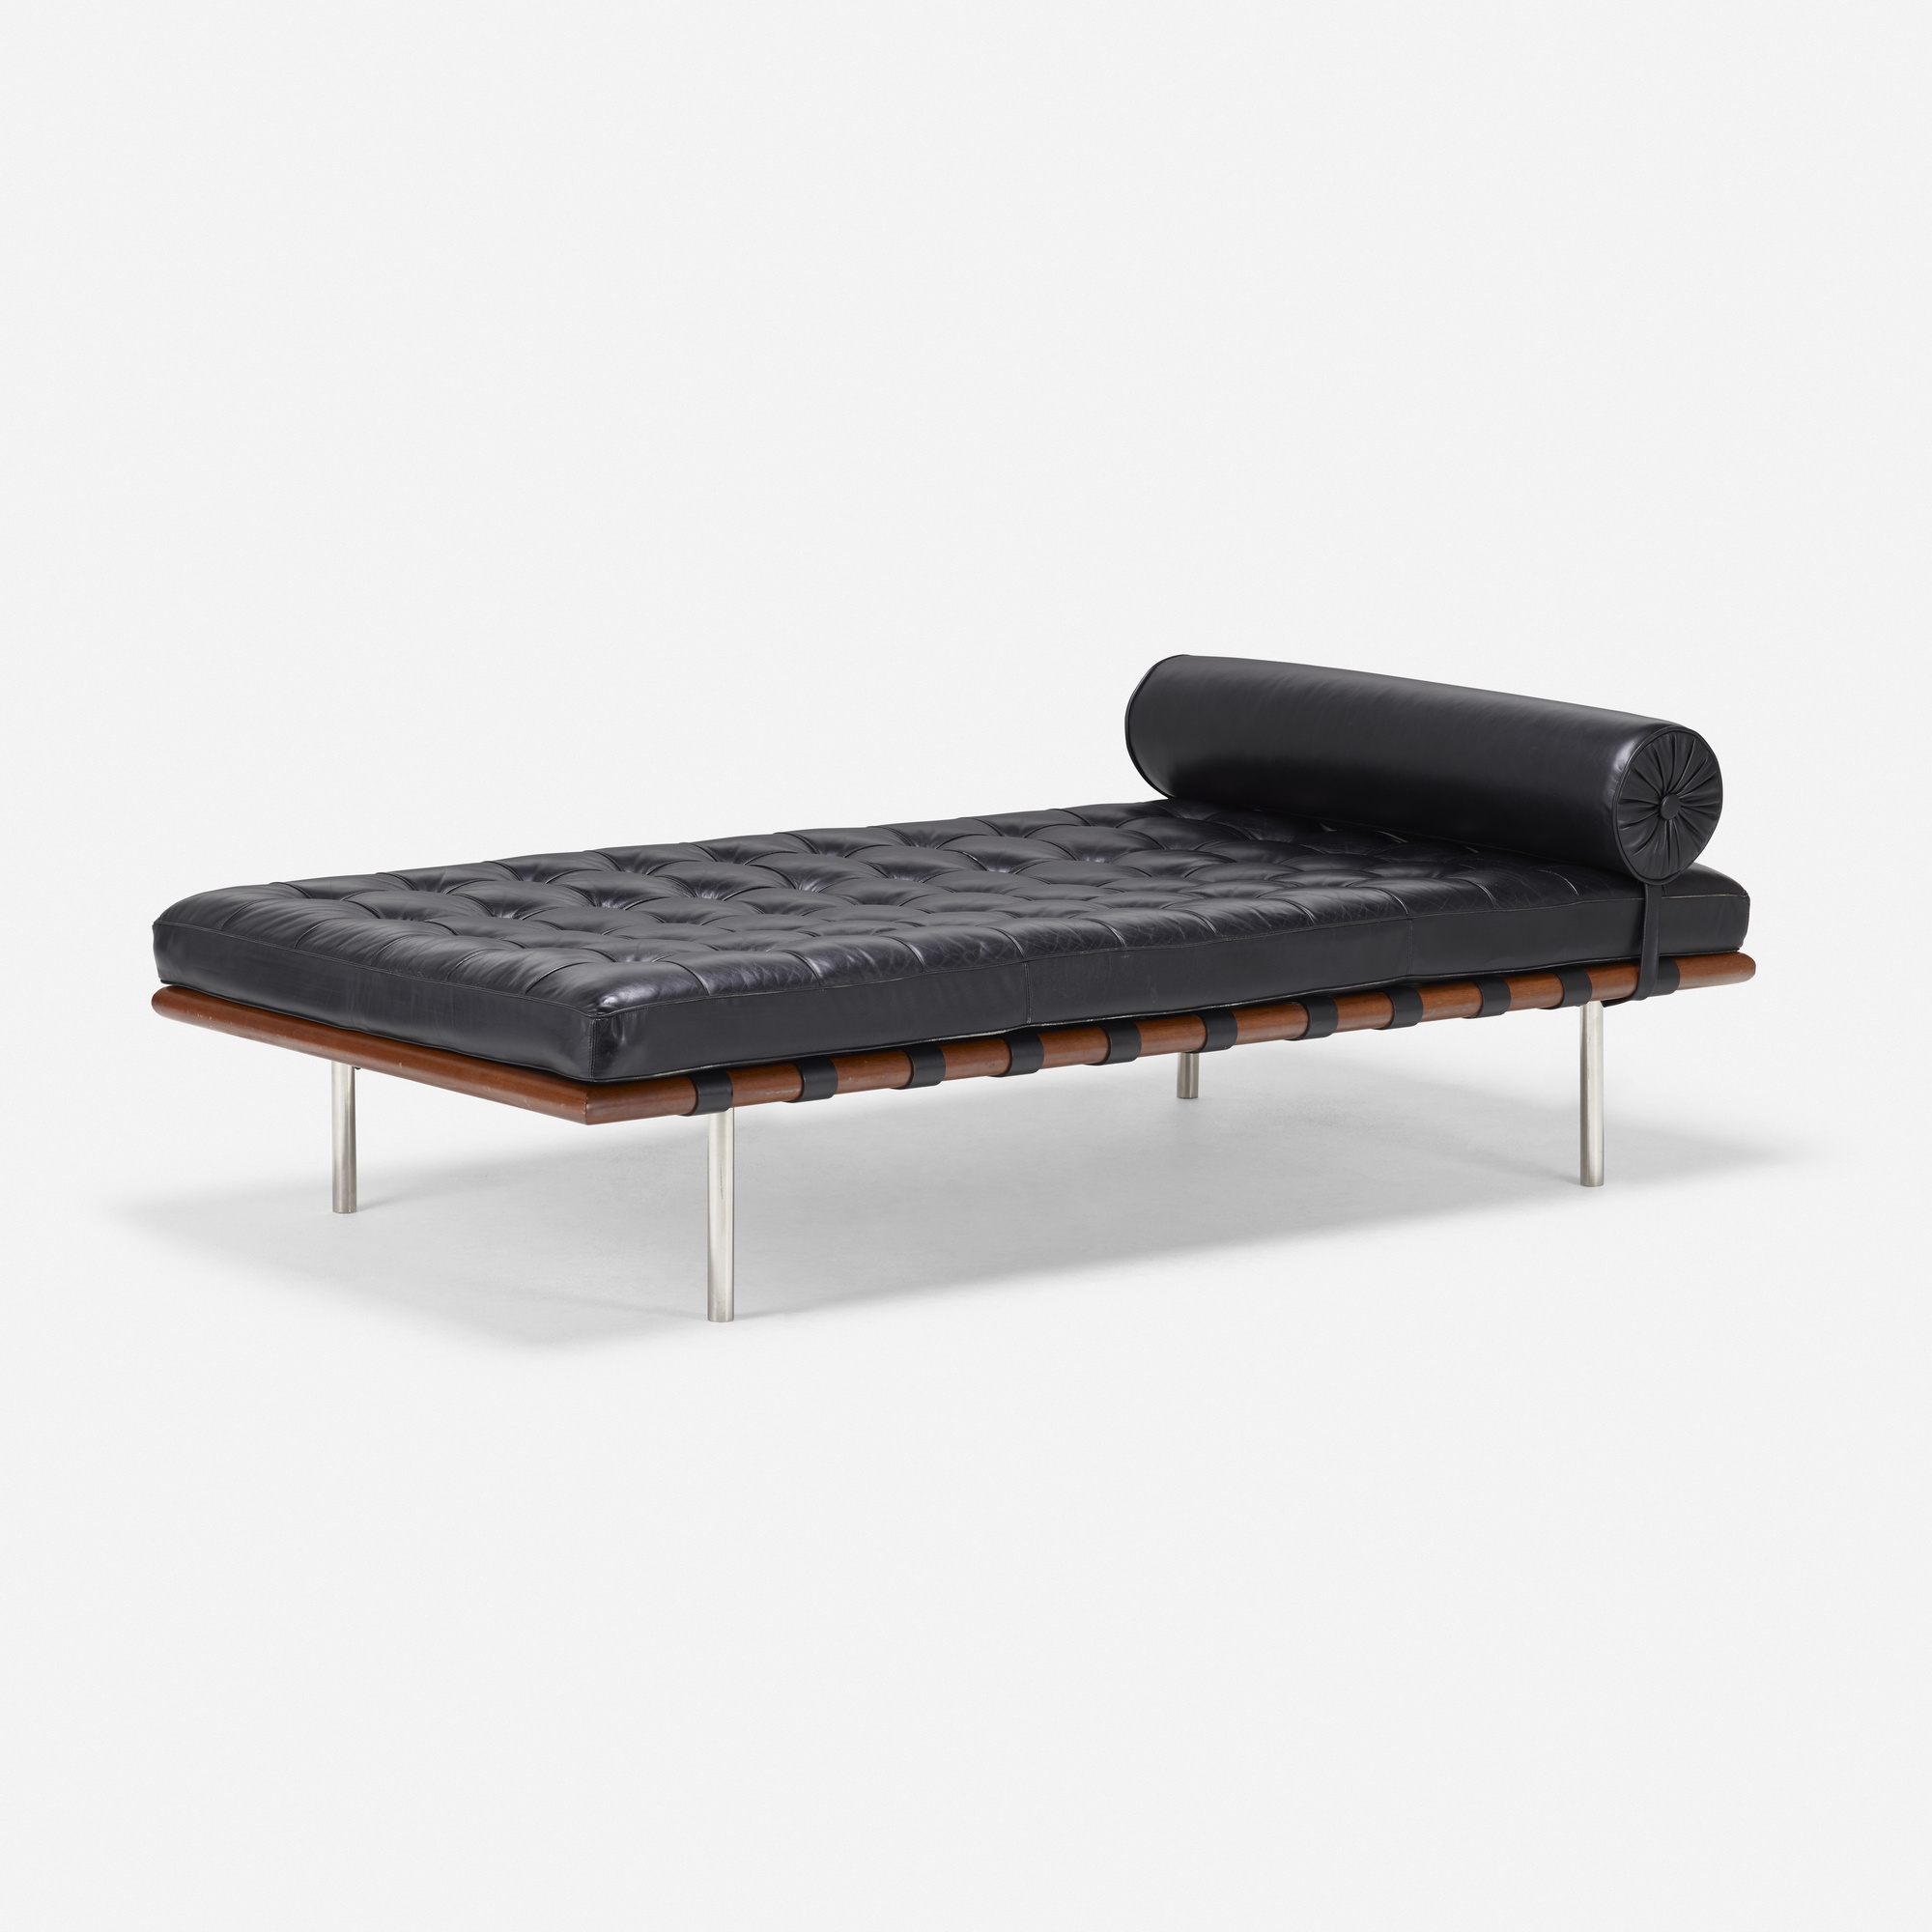 Barcelona daybed by Ludwig Mies van der Rohe, circa 1995